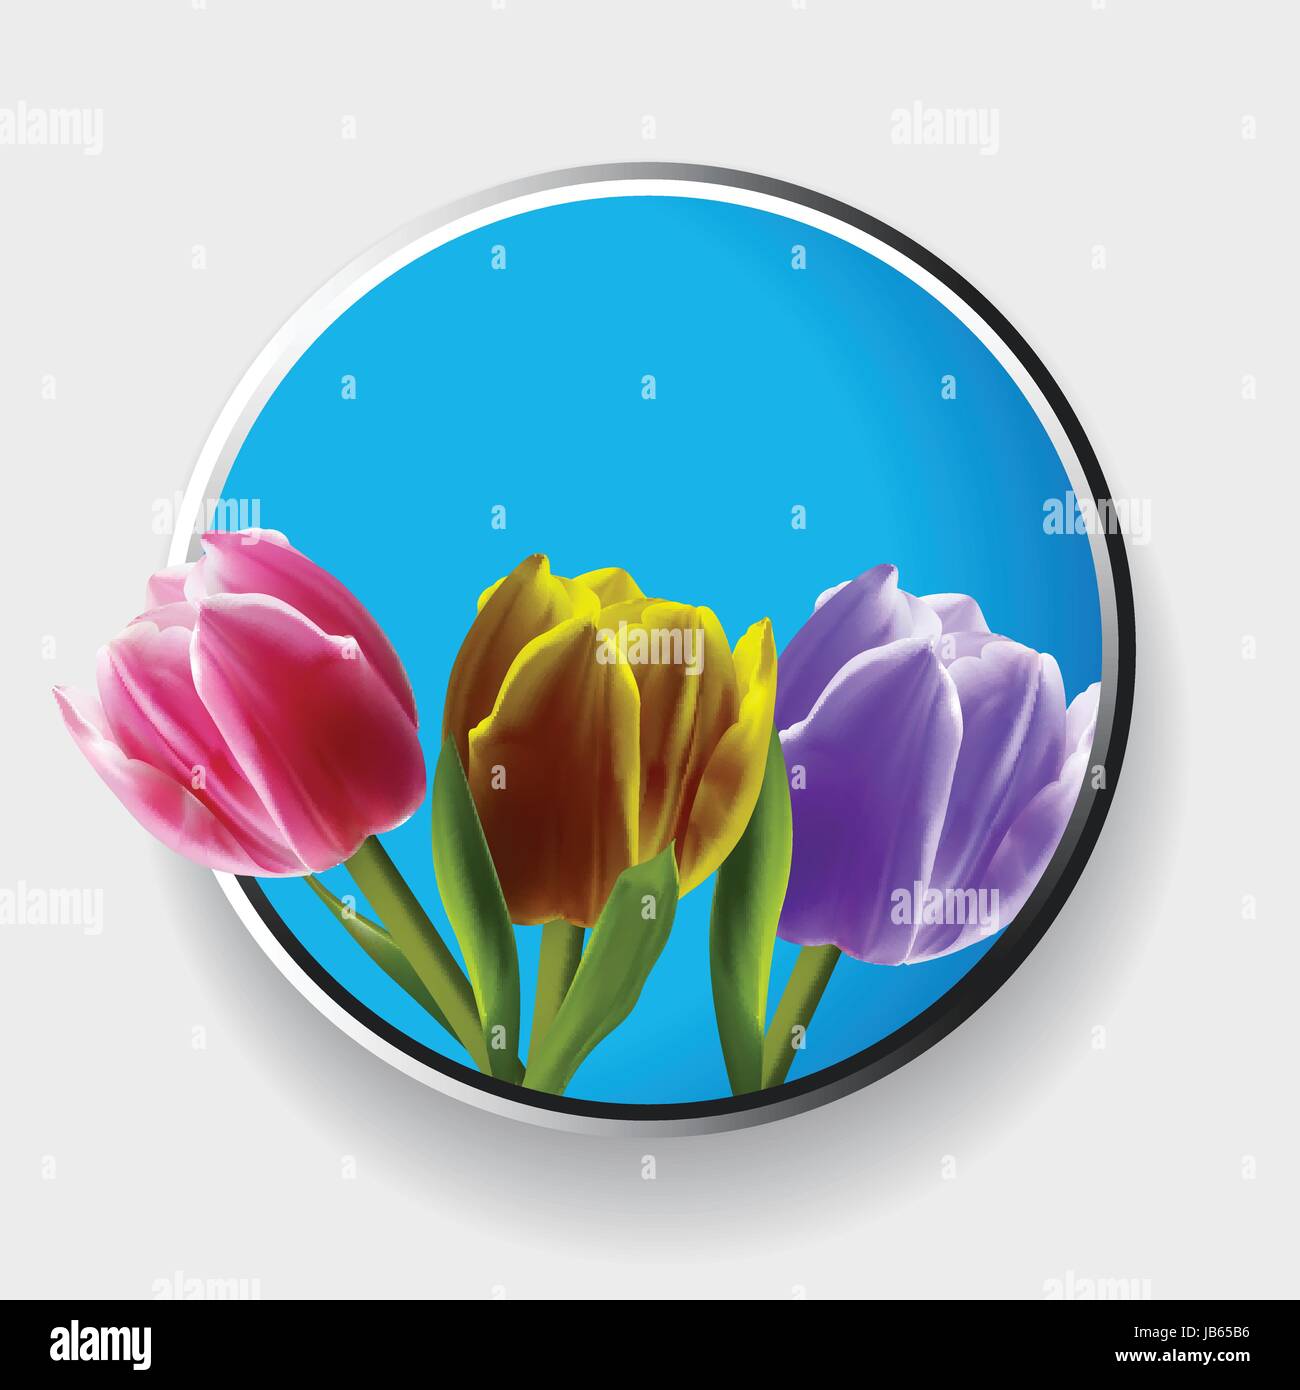 3D Illustration of Trio of Pink Yellow and Purple Tulips Over Metallic and Blue Border With Shadow Stock Vector